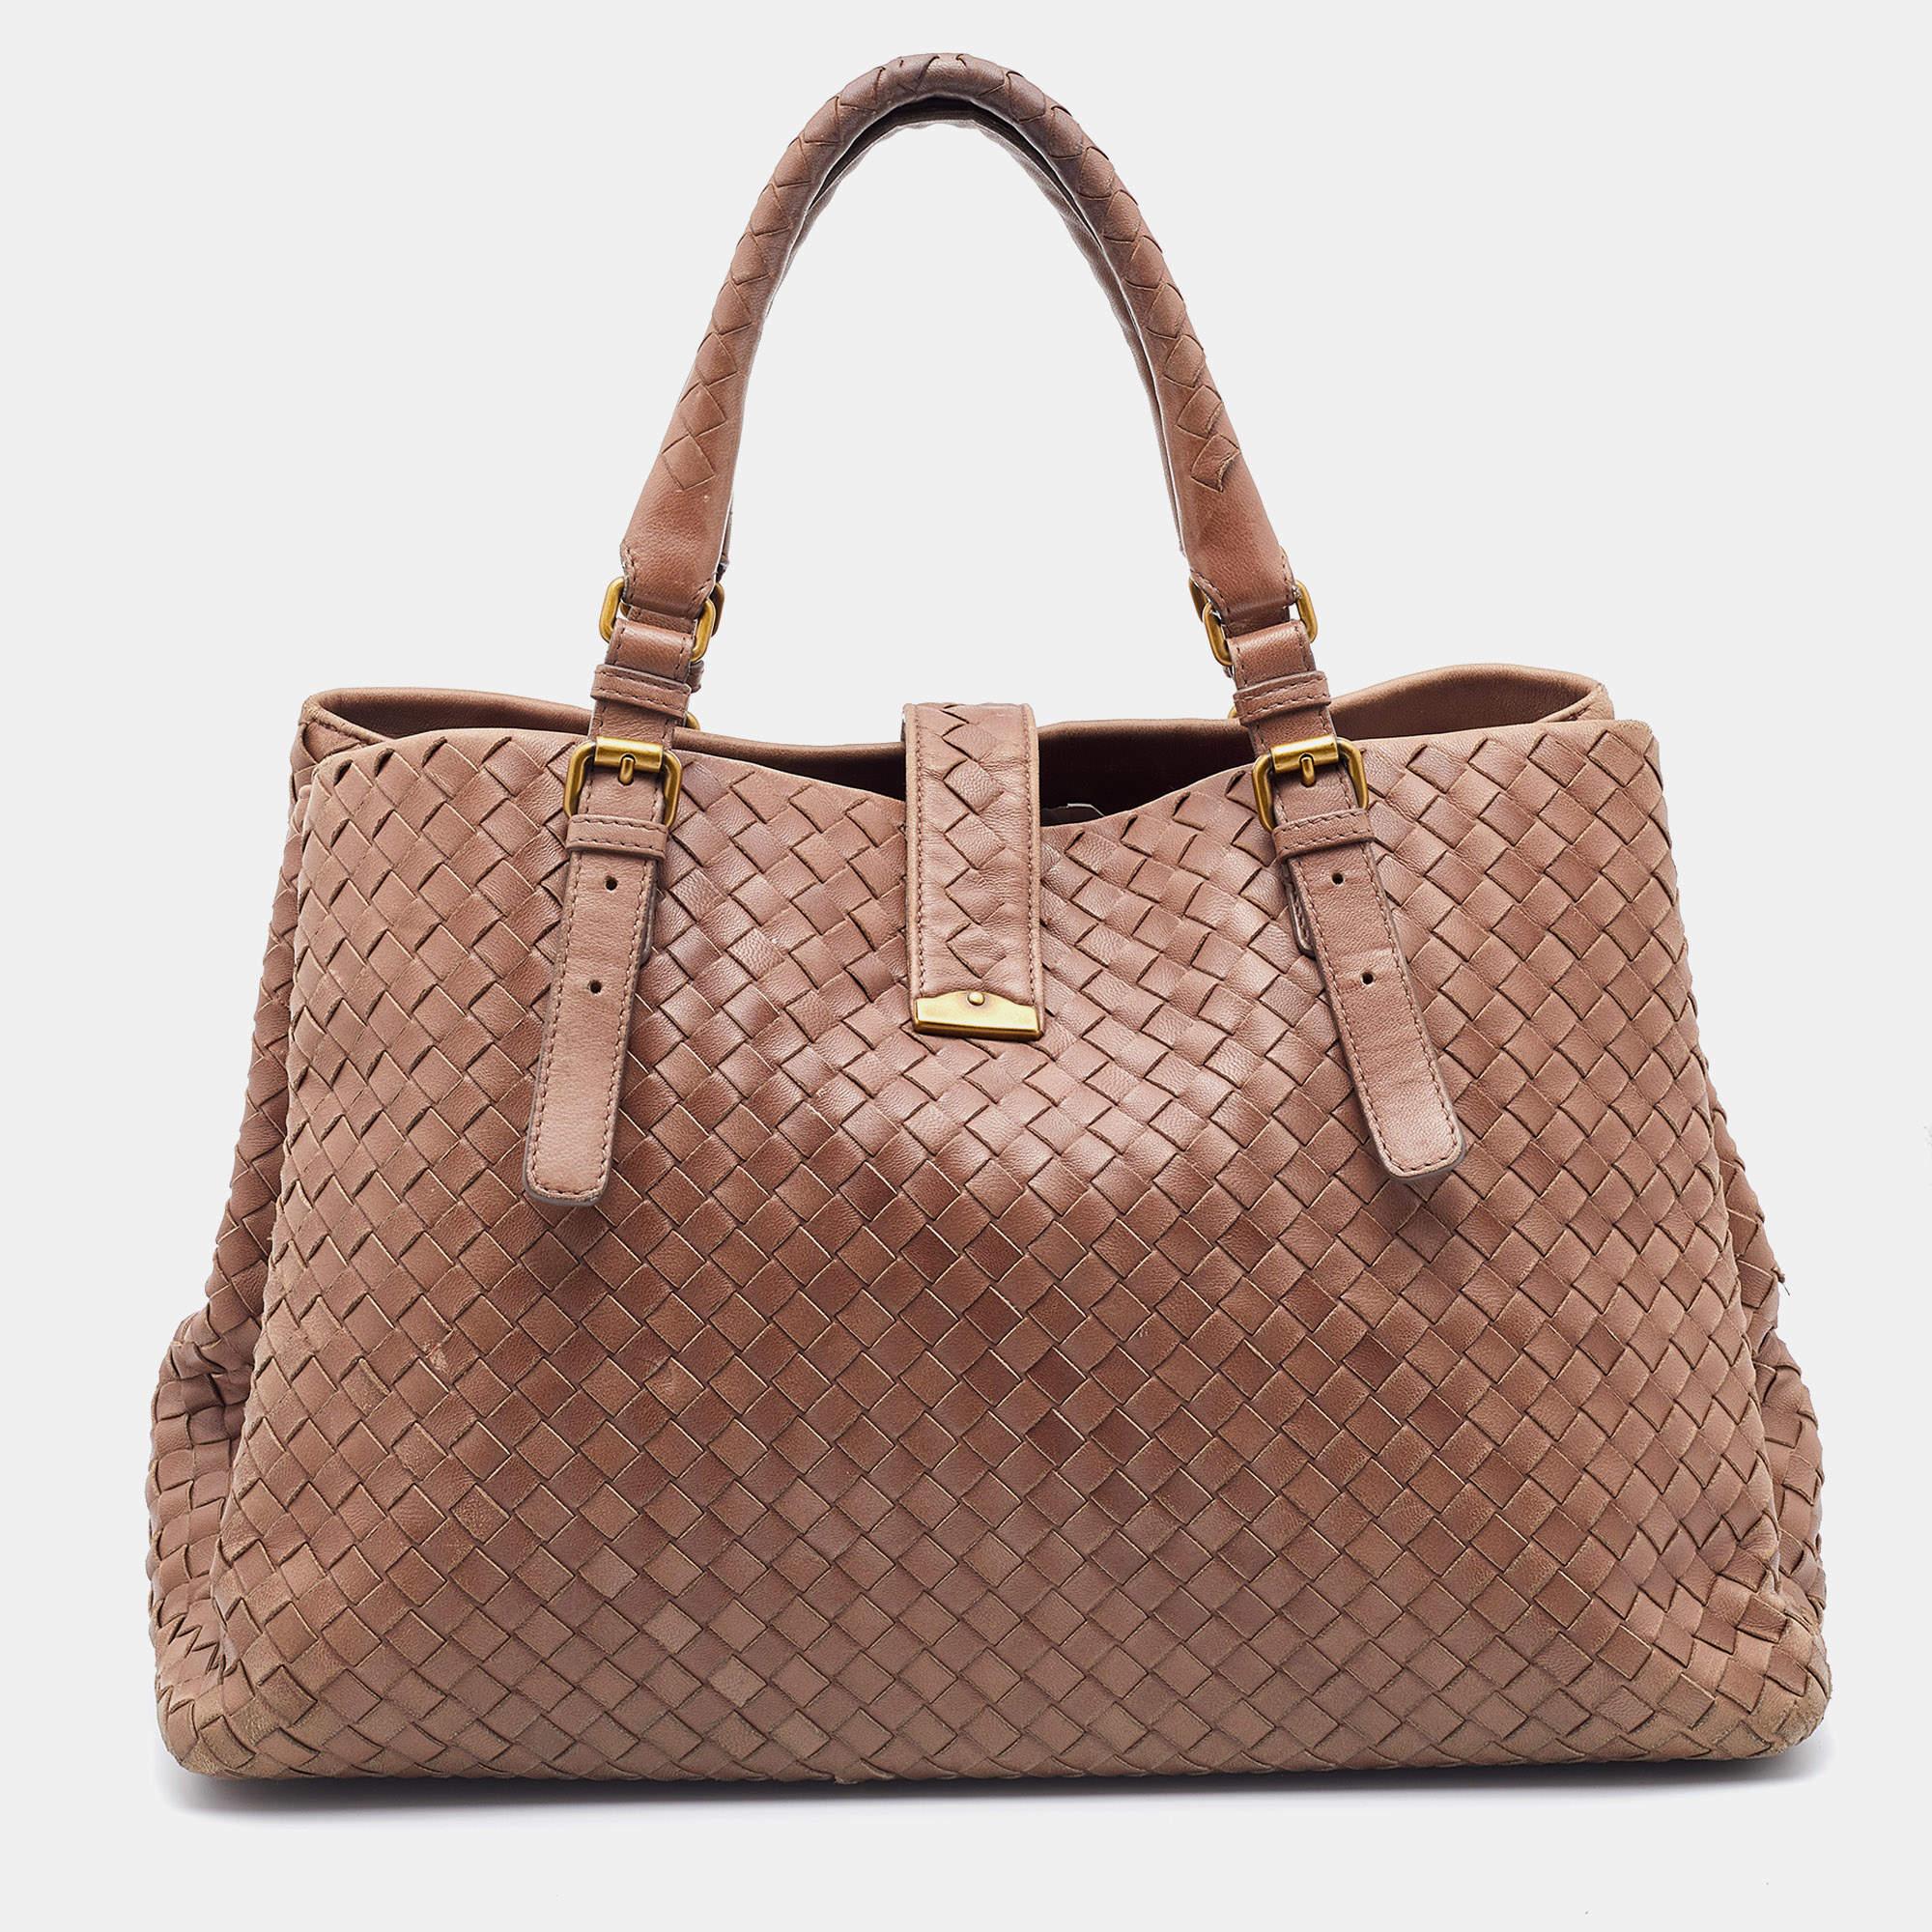 This stylish bag from Bottega Veneta has been crafted from leather. It opens to a capacious interior that can easily hold your everyday essentials. The bag is finished with gold-tone hardware and dual handles.

